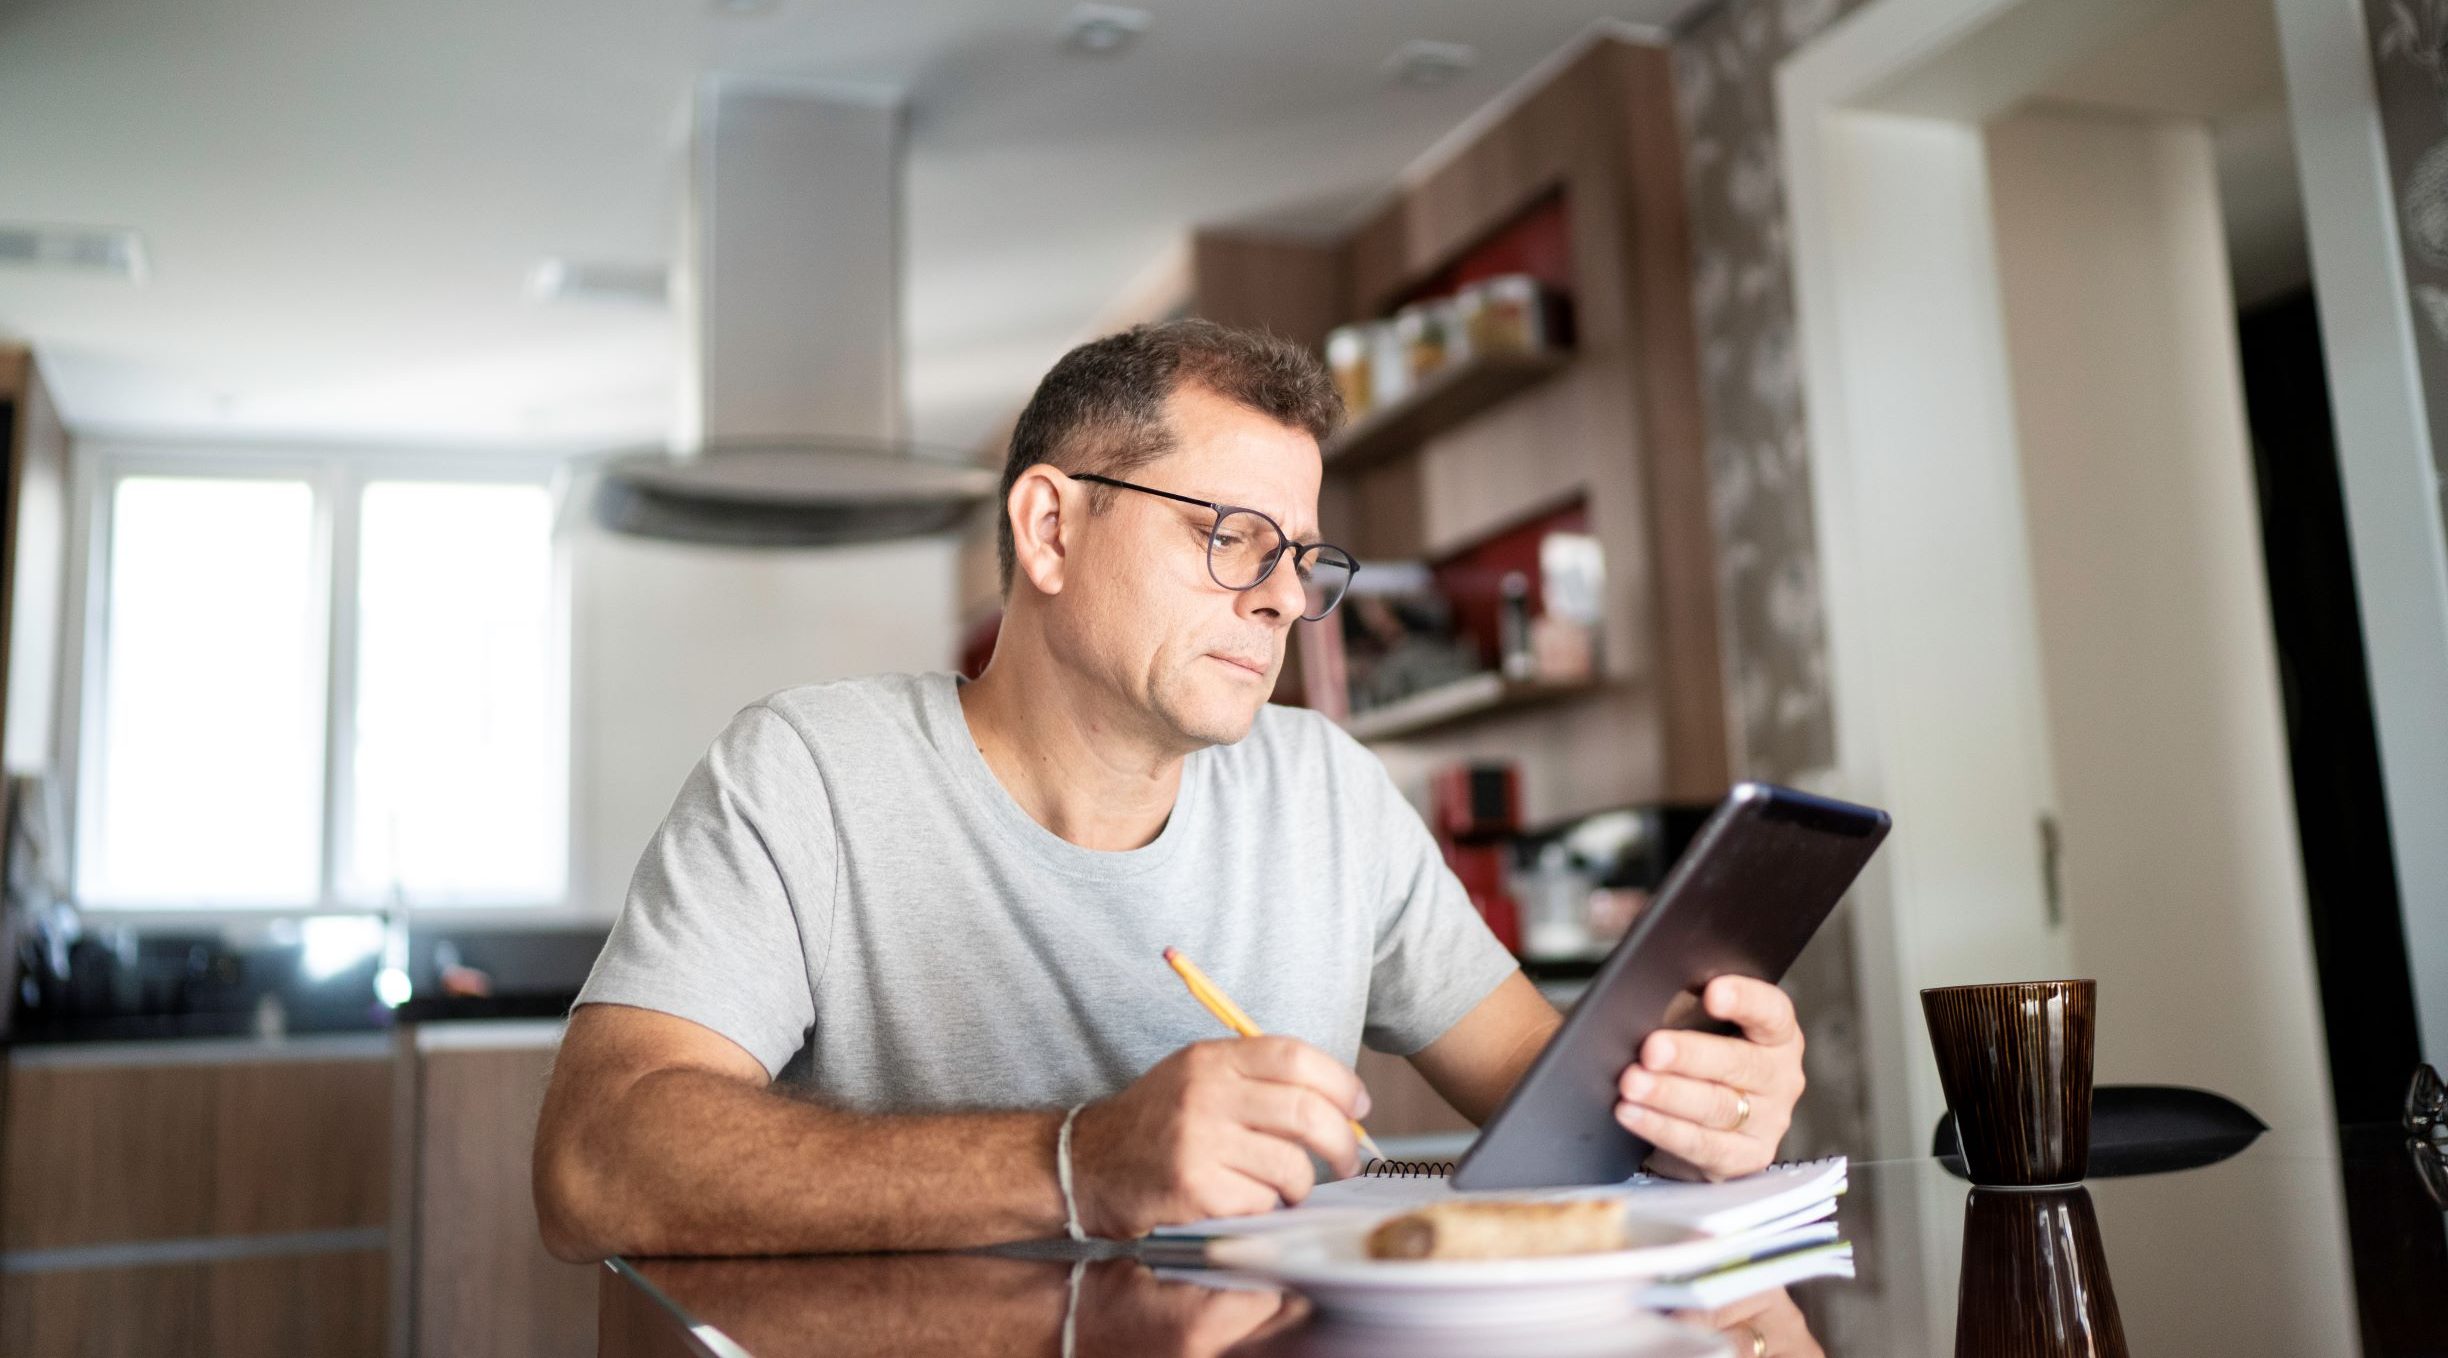 Picture of a man sitting at a table with an ipad